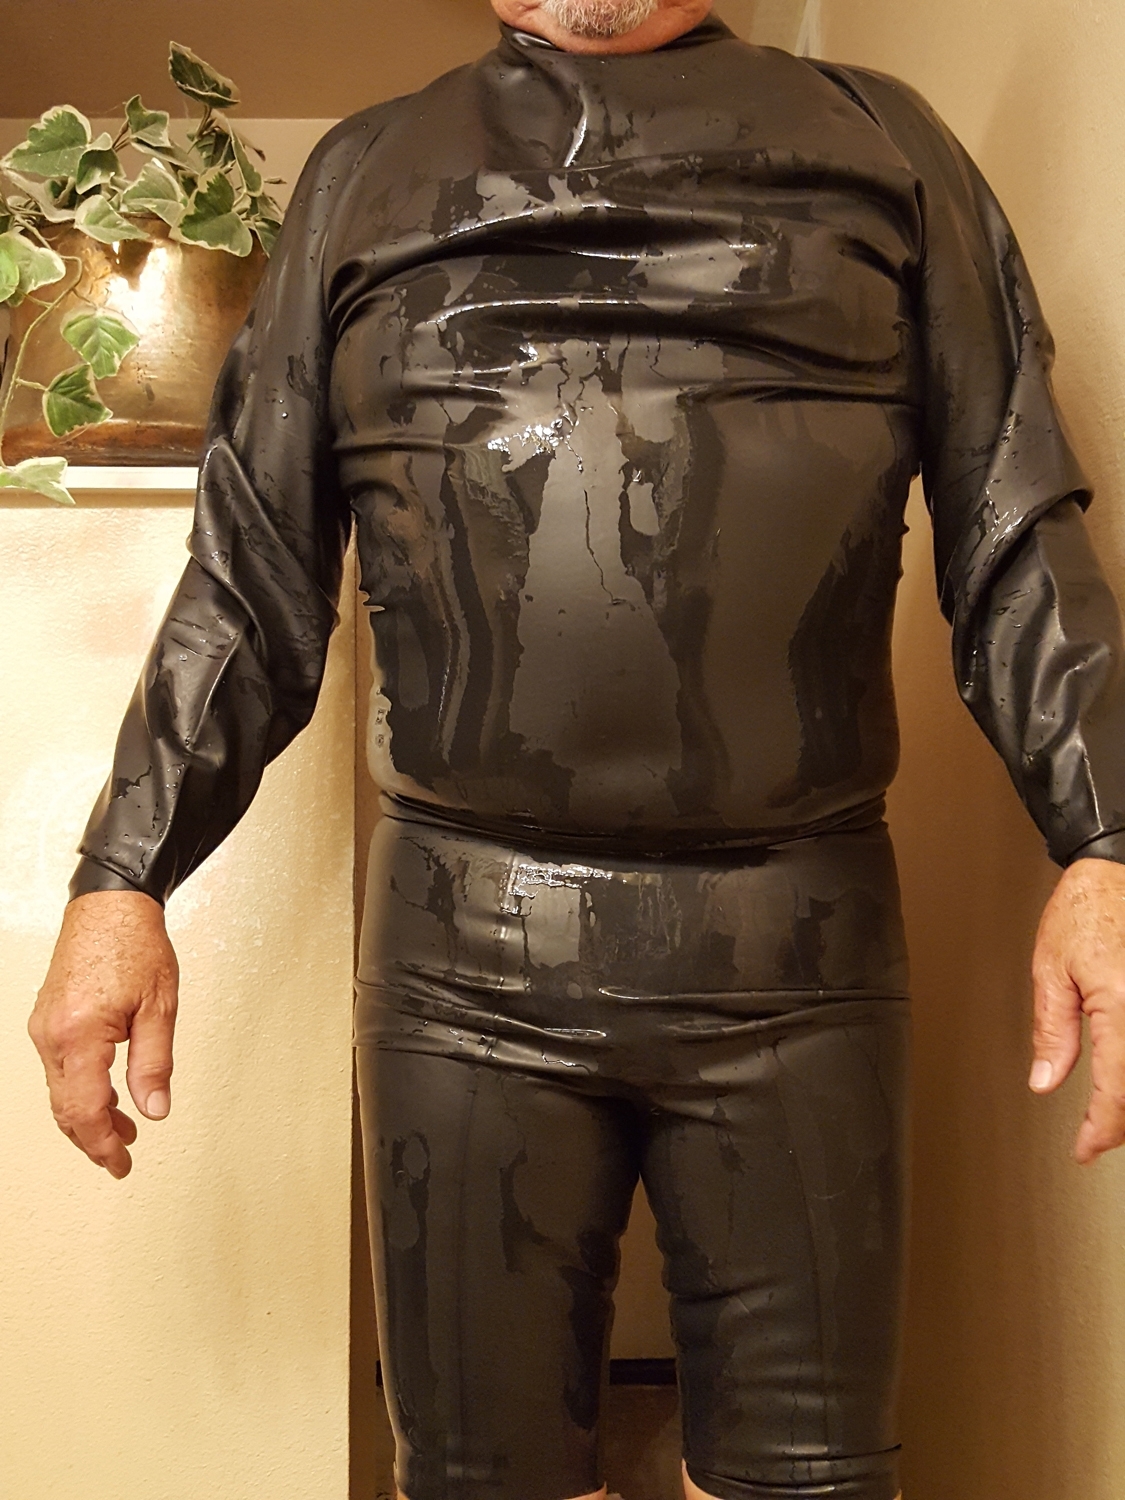 Latex Works Chuck in combo suit Photo | Hydroglove All Rubber Dry Suits